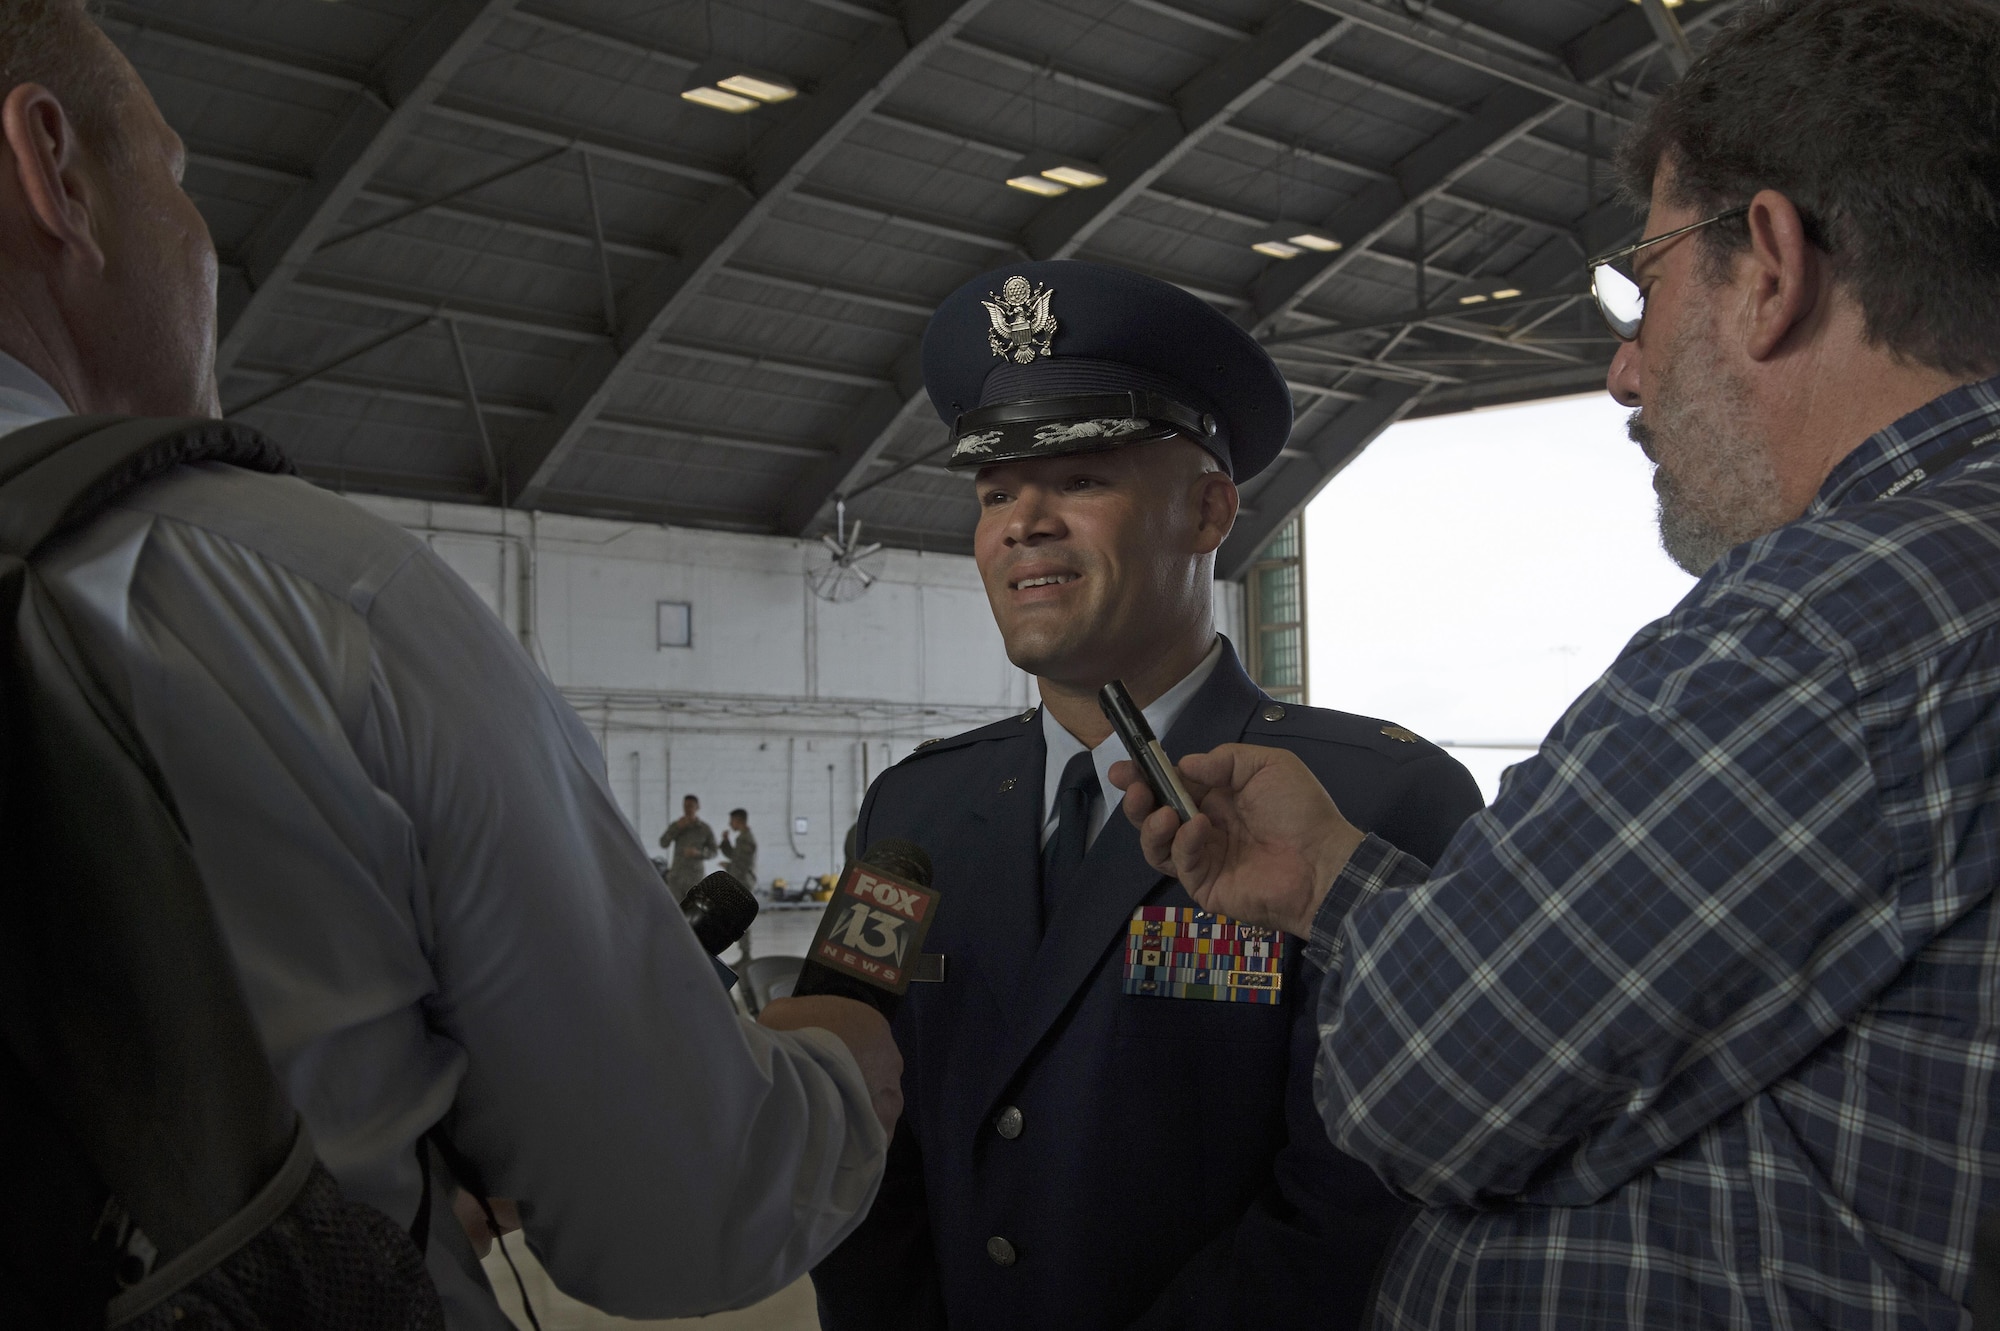 U.S. Air Force Lt. Col. Ricardo Lopez, commander of the 50th Air Refueling Squadron (ARS), meets with the media after his assumption of command ceremony at MacDill Air Force Base, Fla., Oct. 2, 2017.